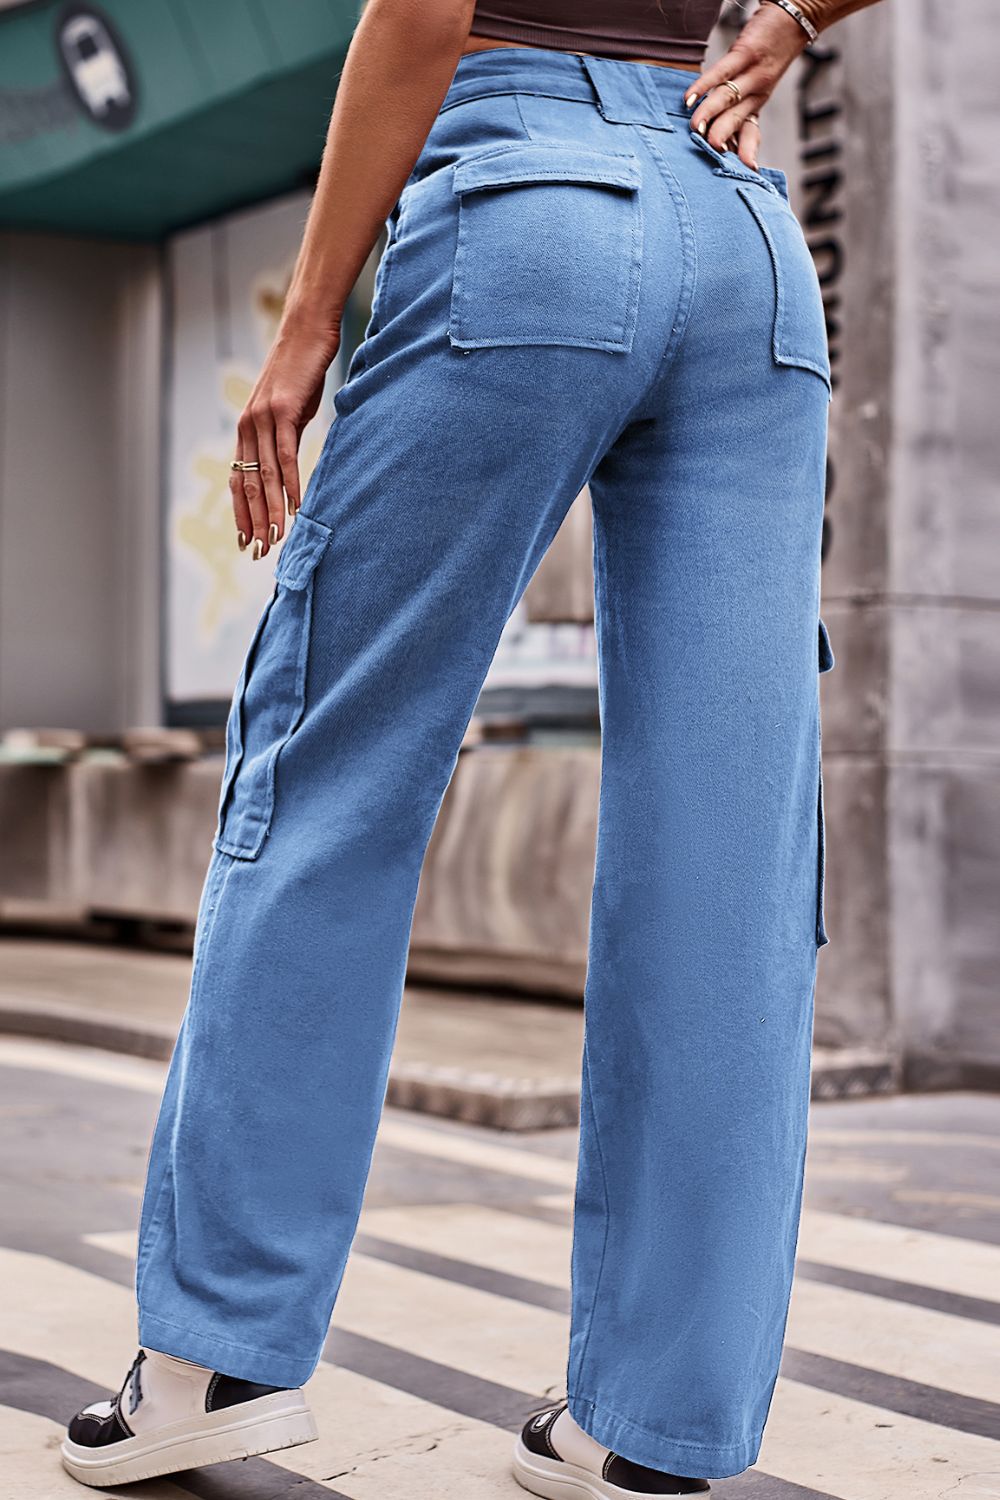 Buttoned High Waist Loose Fit Jeans Print on any thing USA/STOD clothes